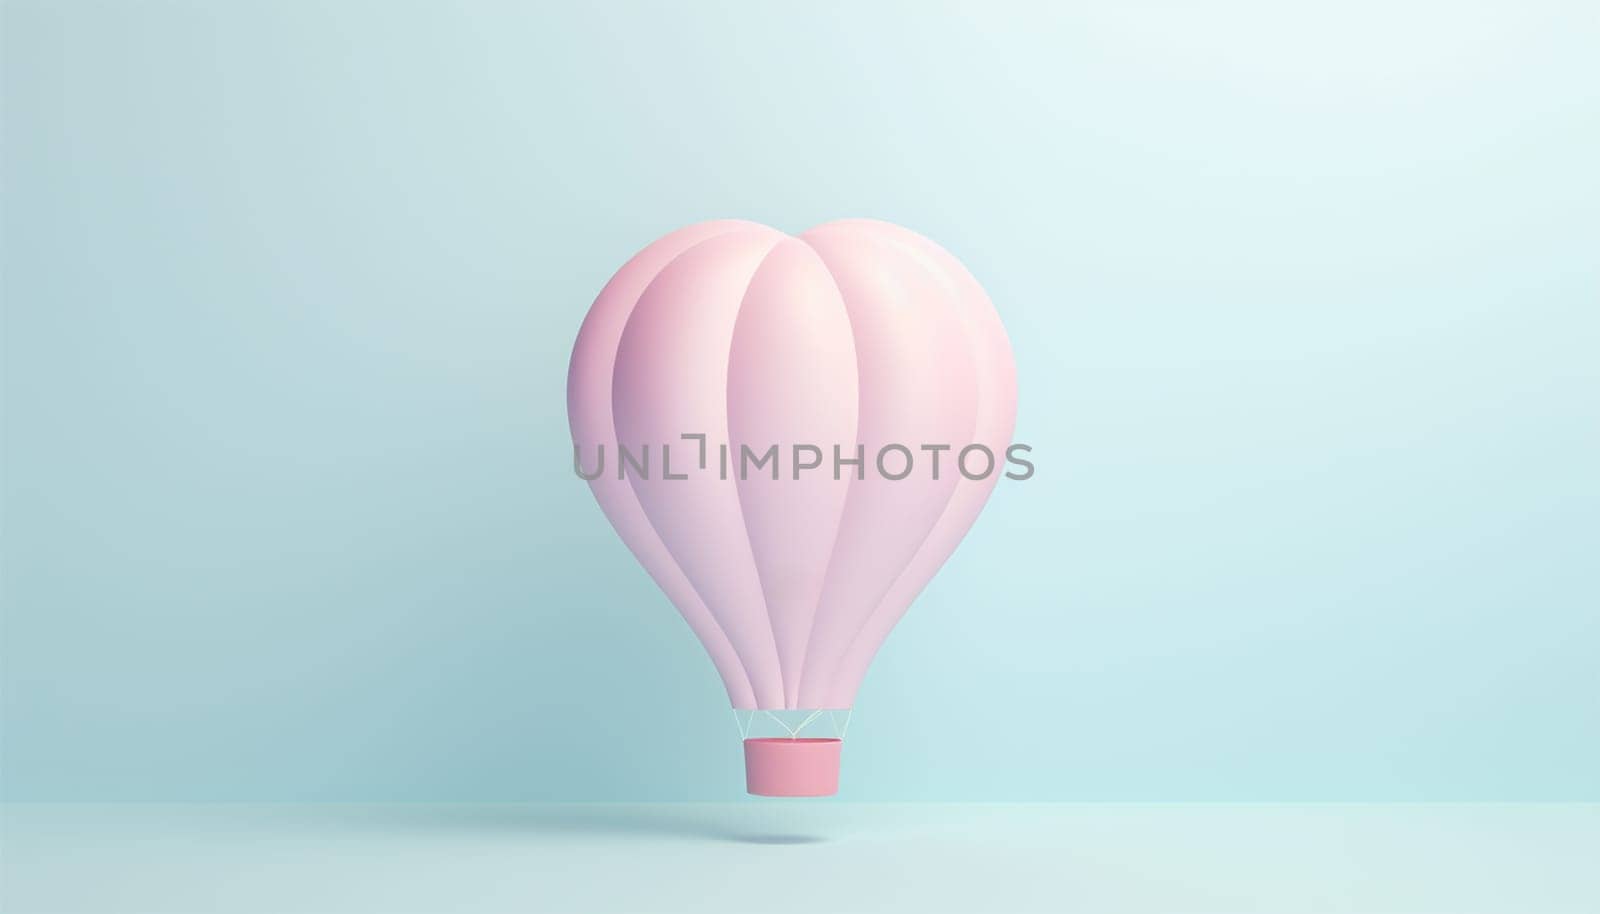 Cute pastel hot air balloon flying in the air. Design illustration of scene with hot air balloons float up in the sky on 3D paper art style. Hot air balloon float up in the sky. pastel paper cut and craft style., illustration. Pink,purple and blue color Copy space Space for text